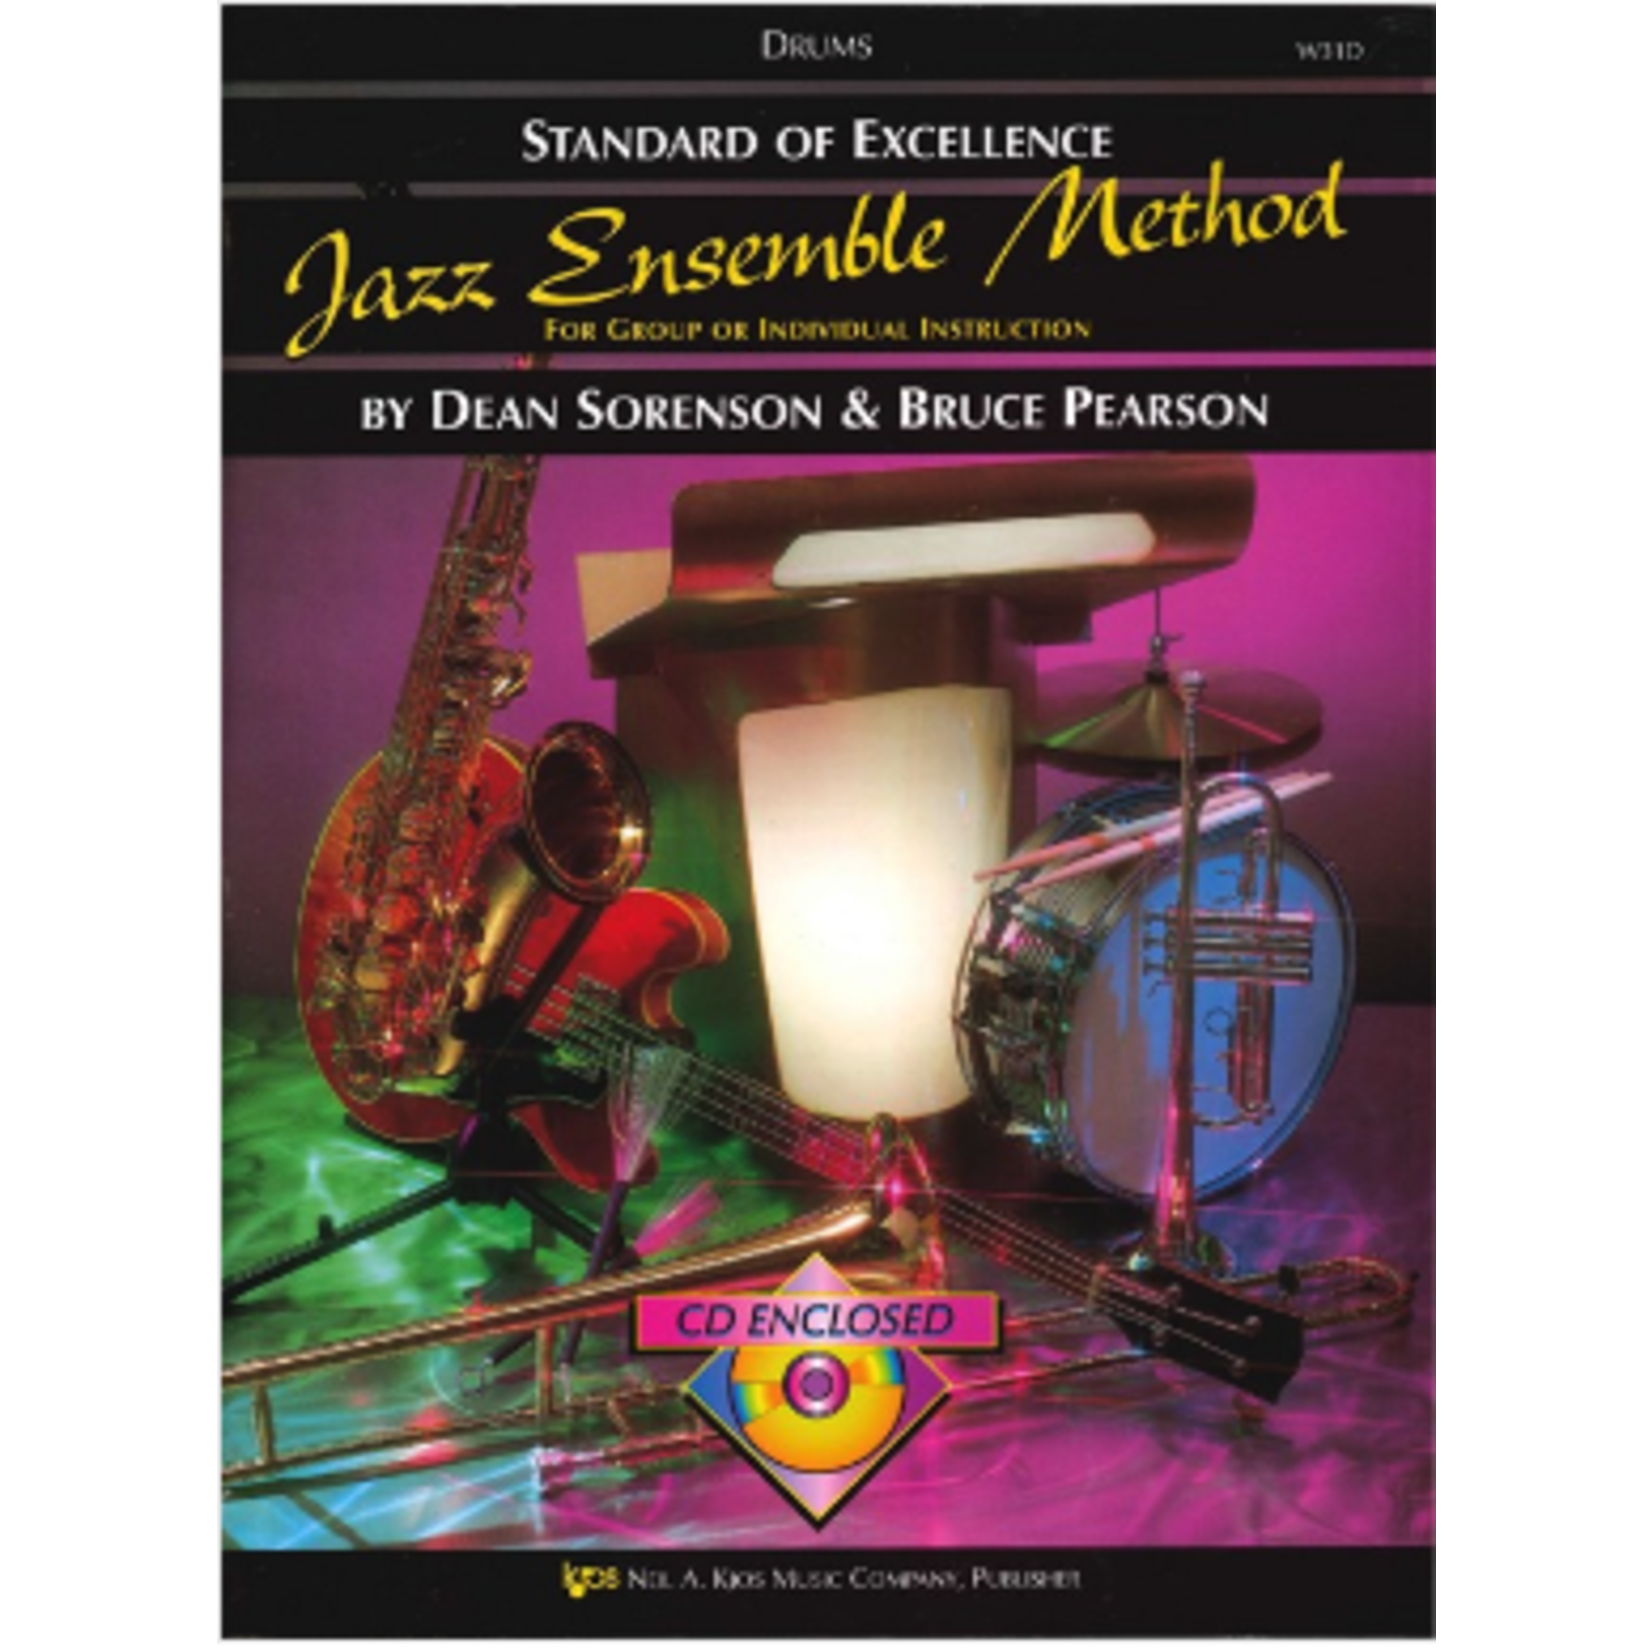 Standard of Excellence Jazz Ensemble Method Drums